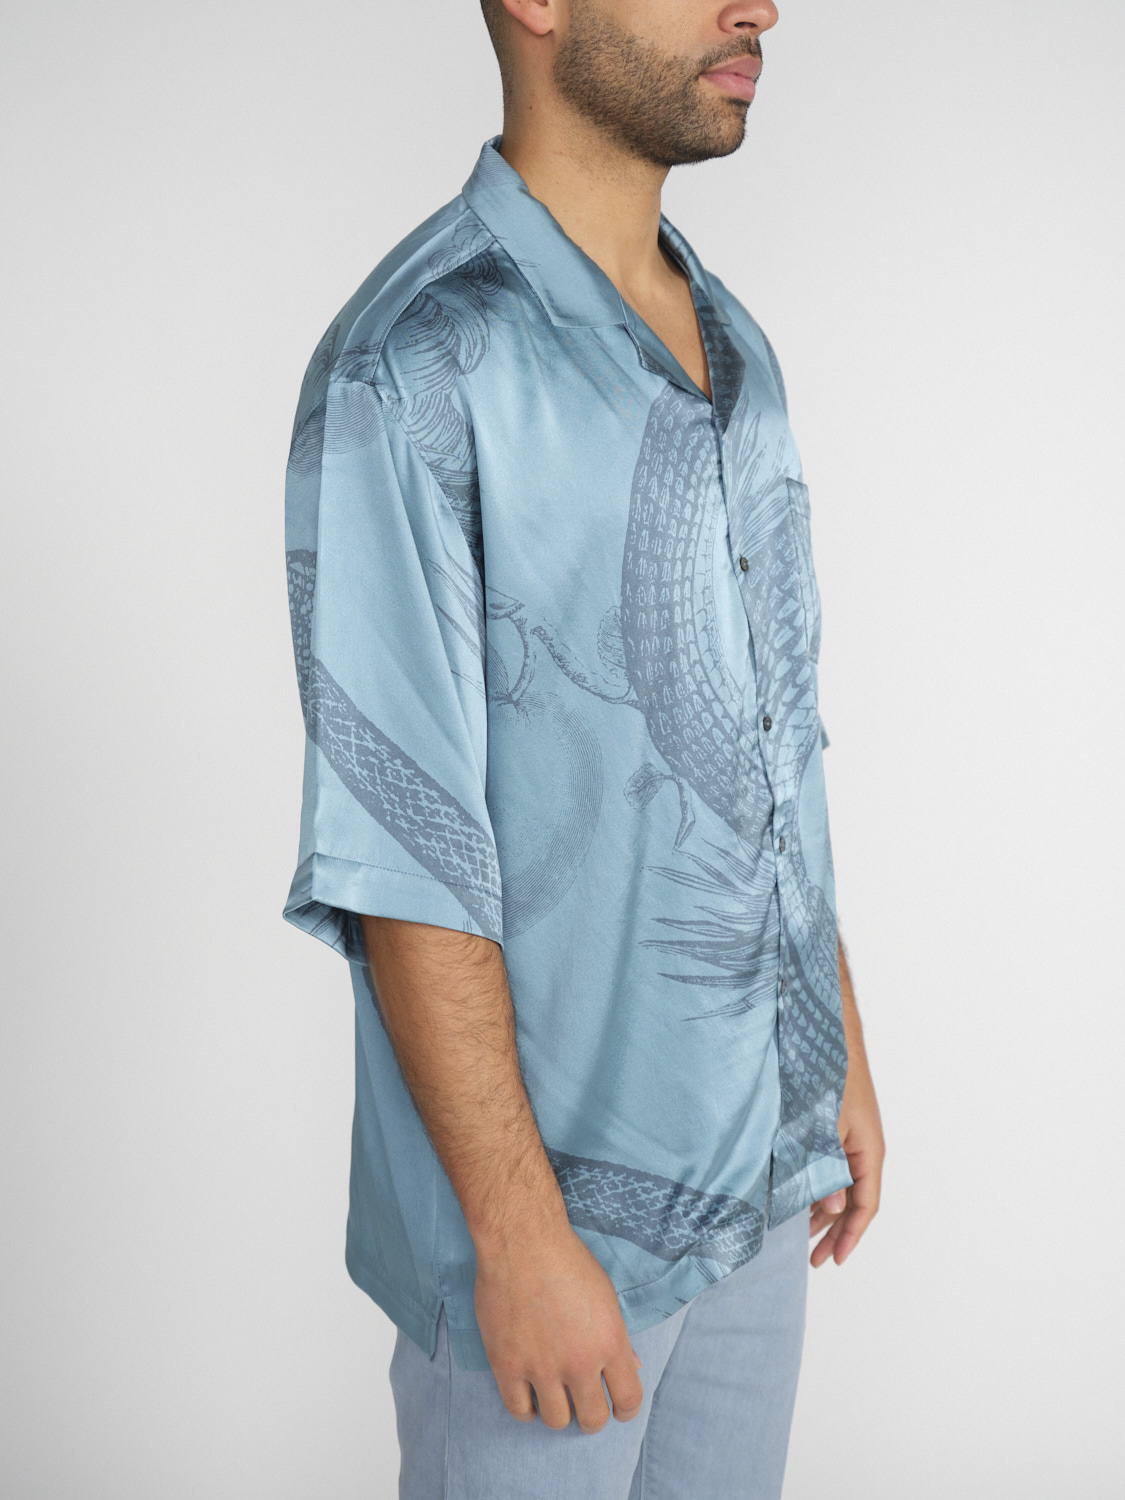 friendly hunting Chemise Grow – silk shirt with a heavenly pattern  mint L